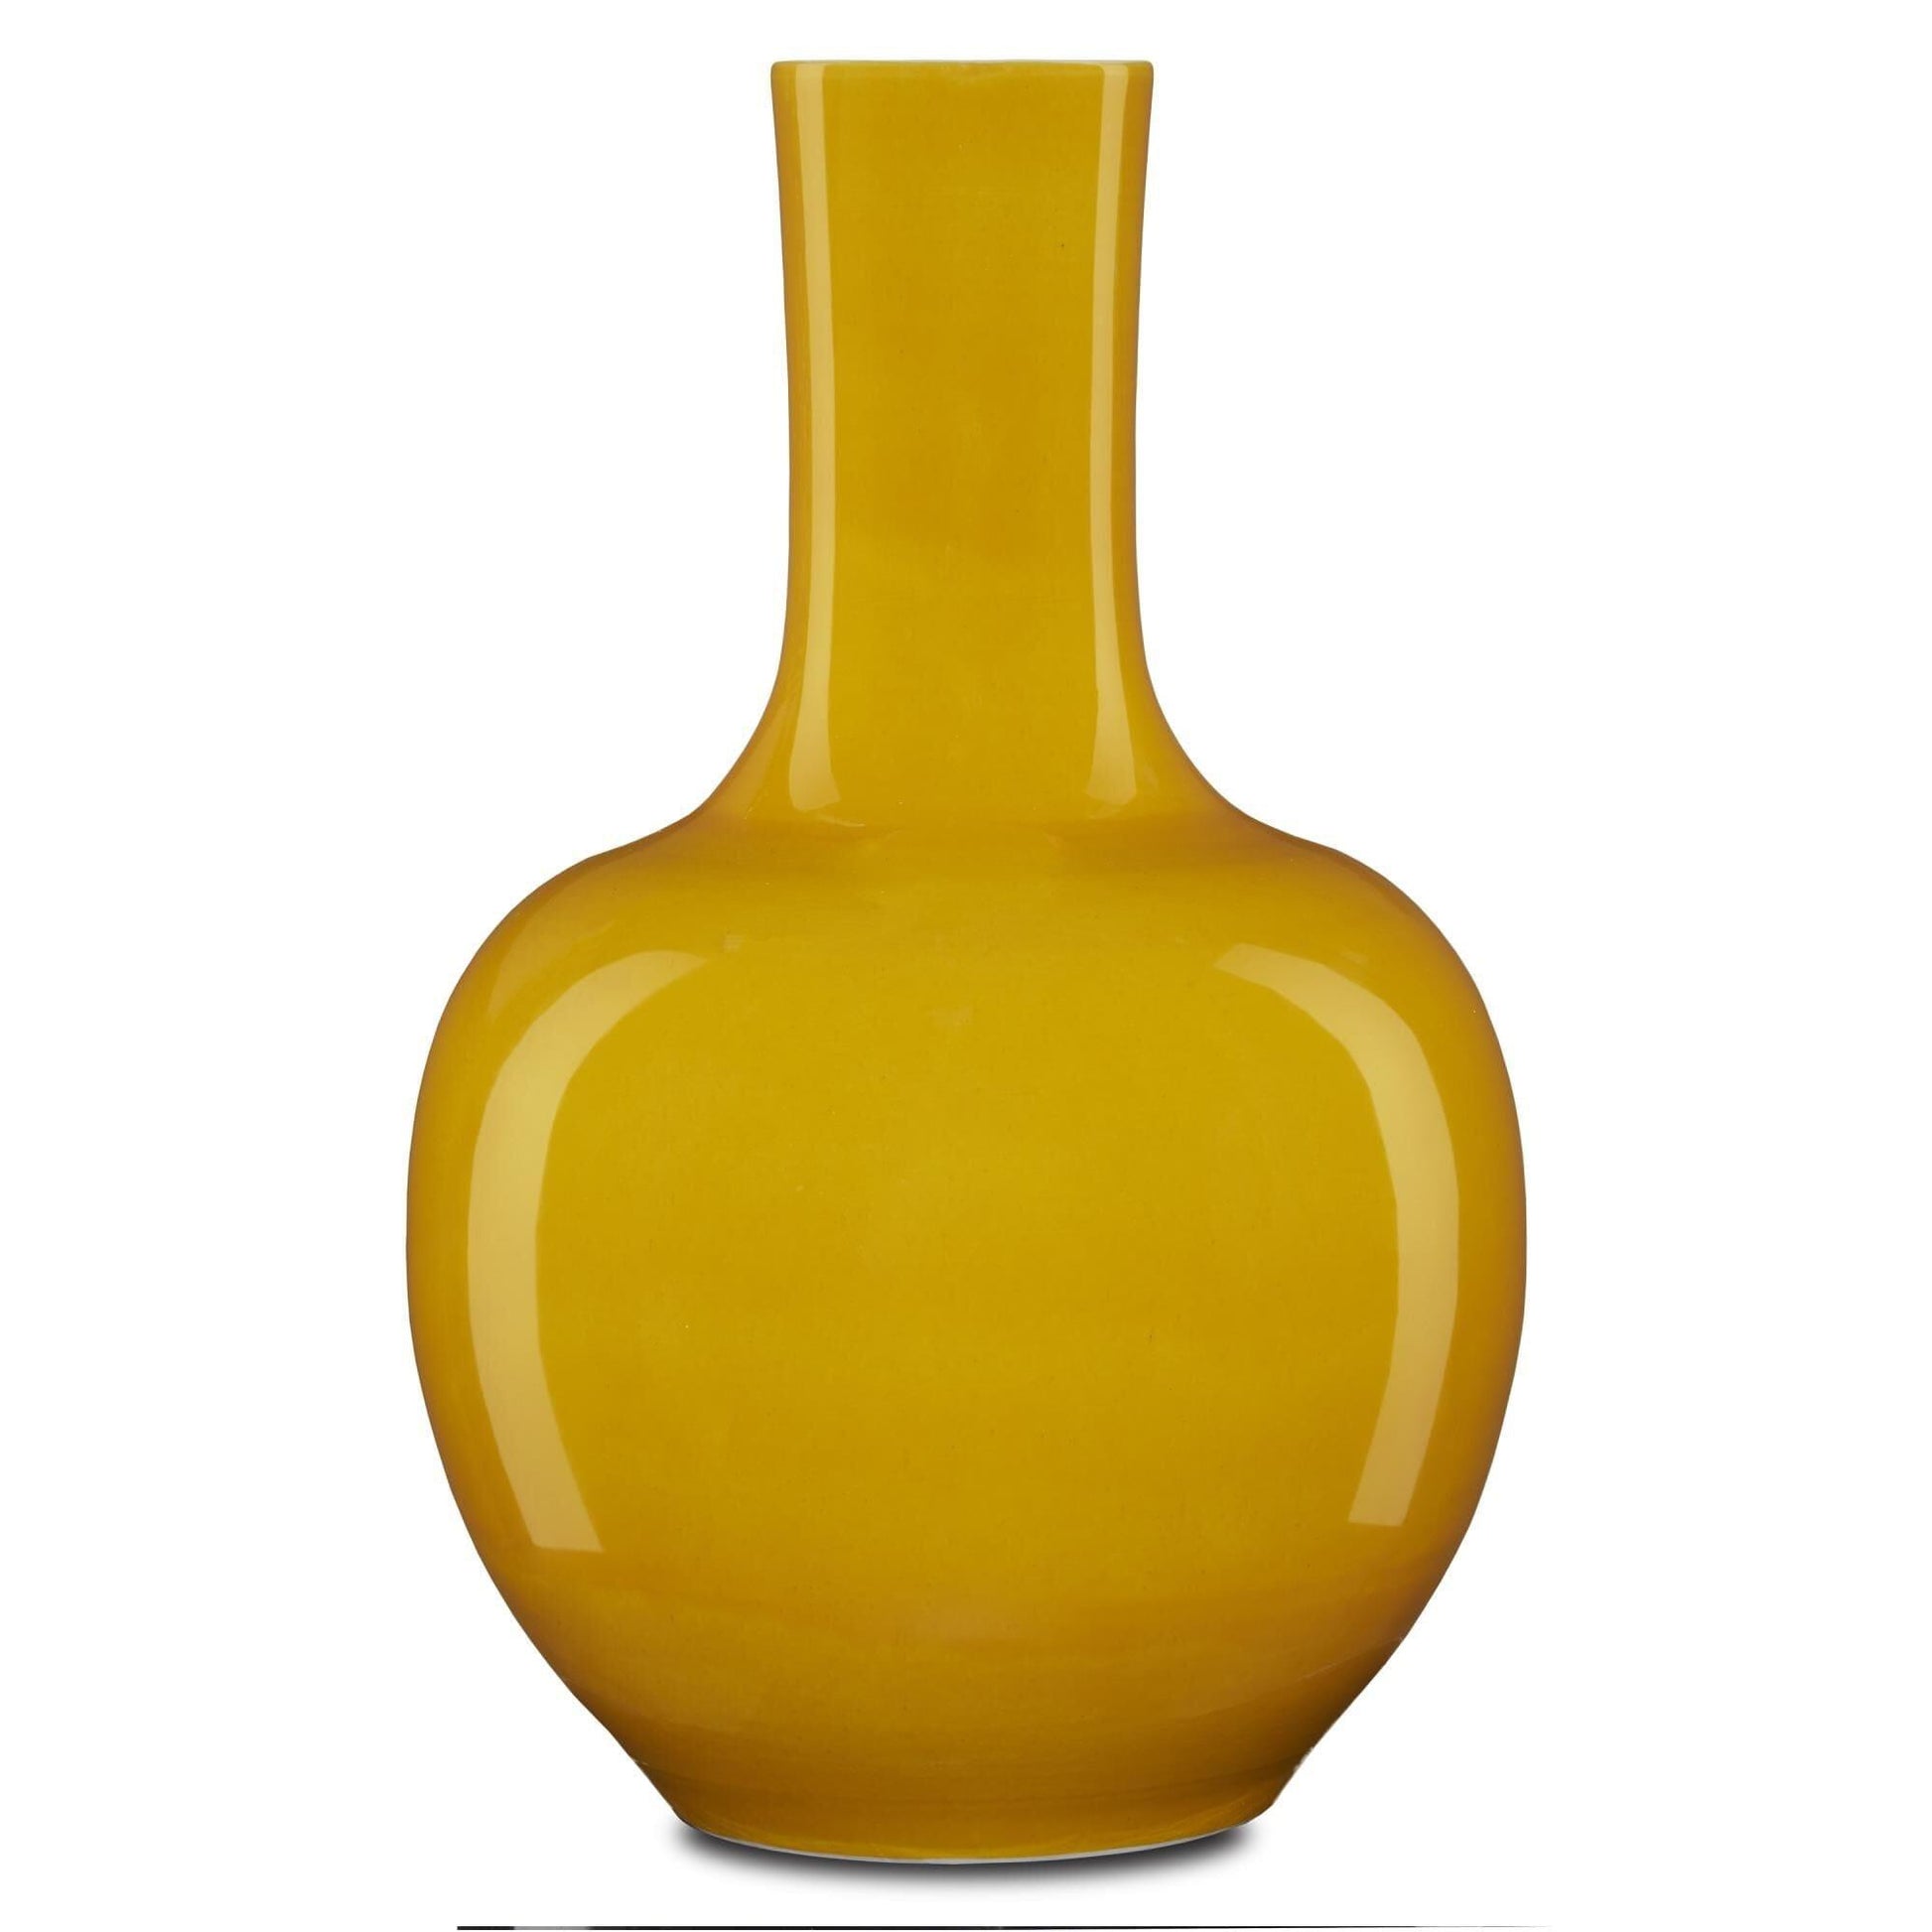 Yellow Imperial Yellow Long Neck Vase Vases & Jars Sideboards and Things By Currey & Co